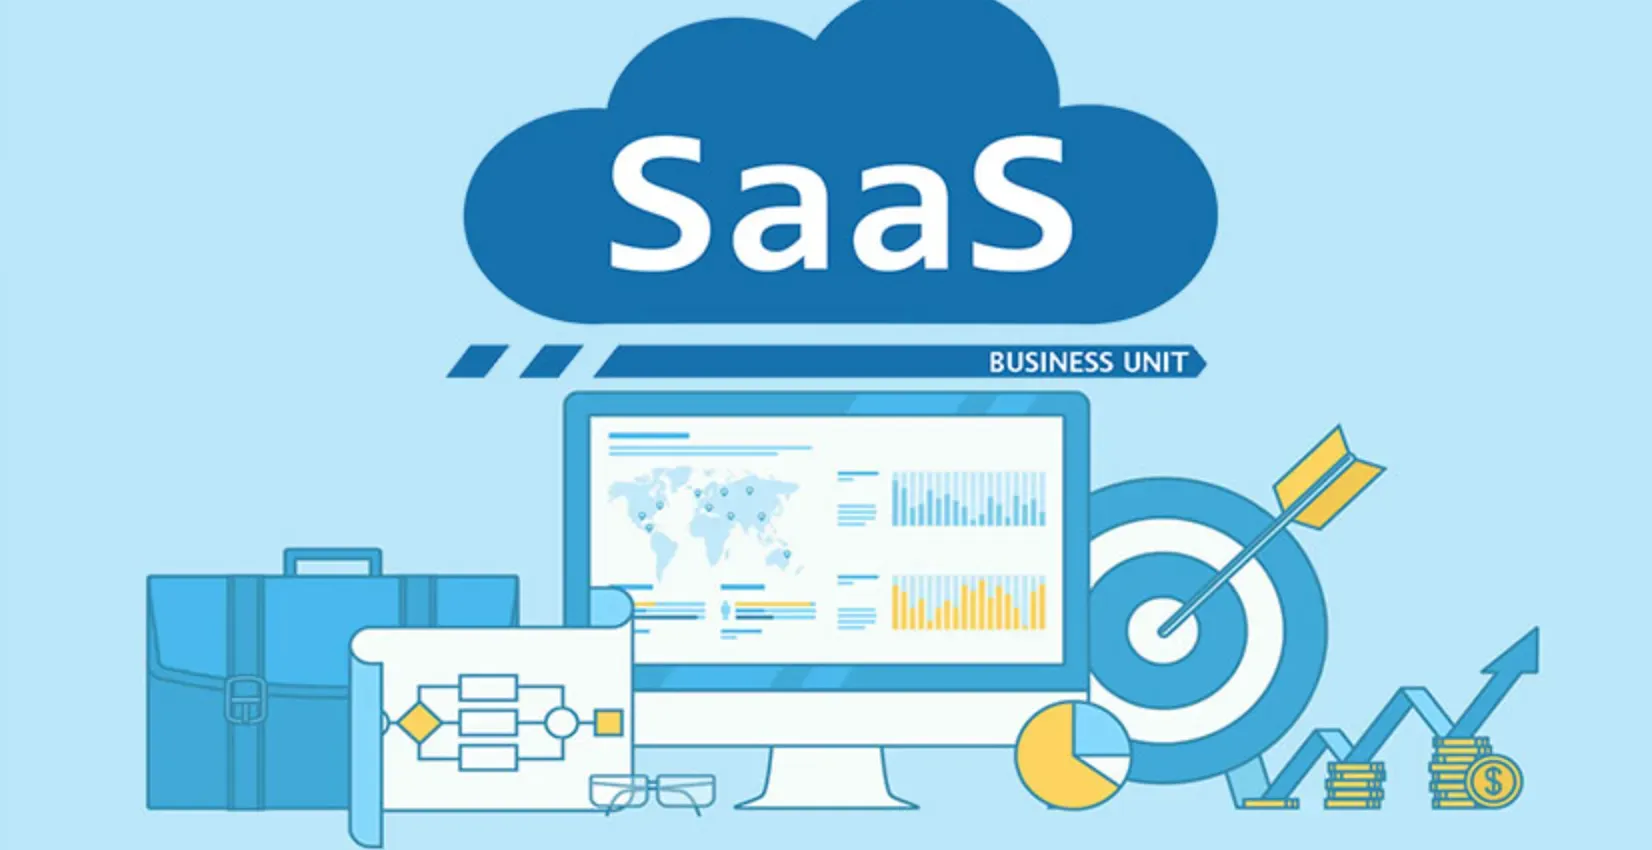 Process automation from Software-as-a-Service (SaaS) companies